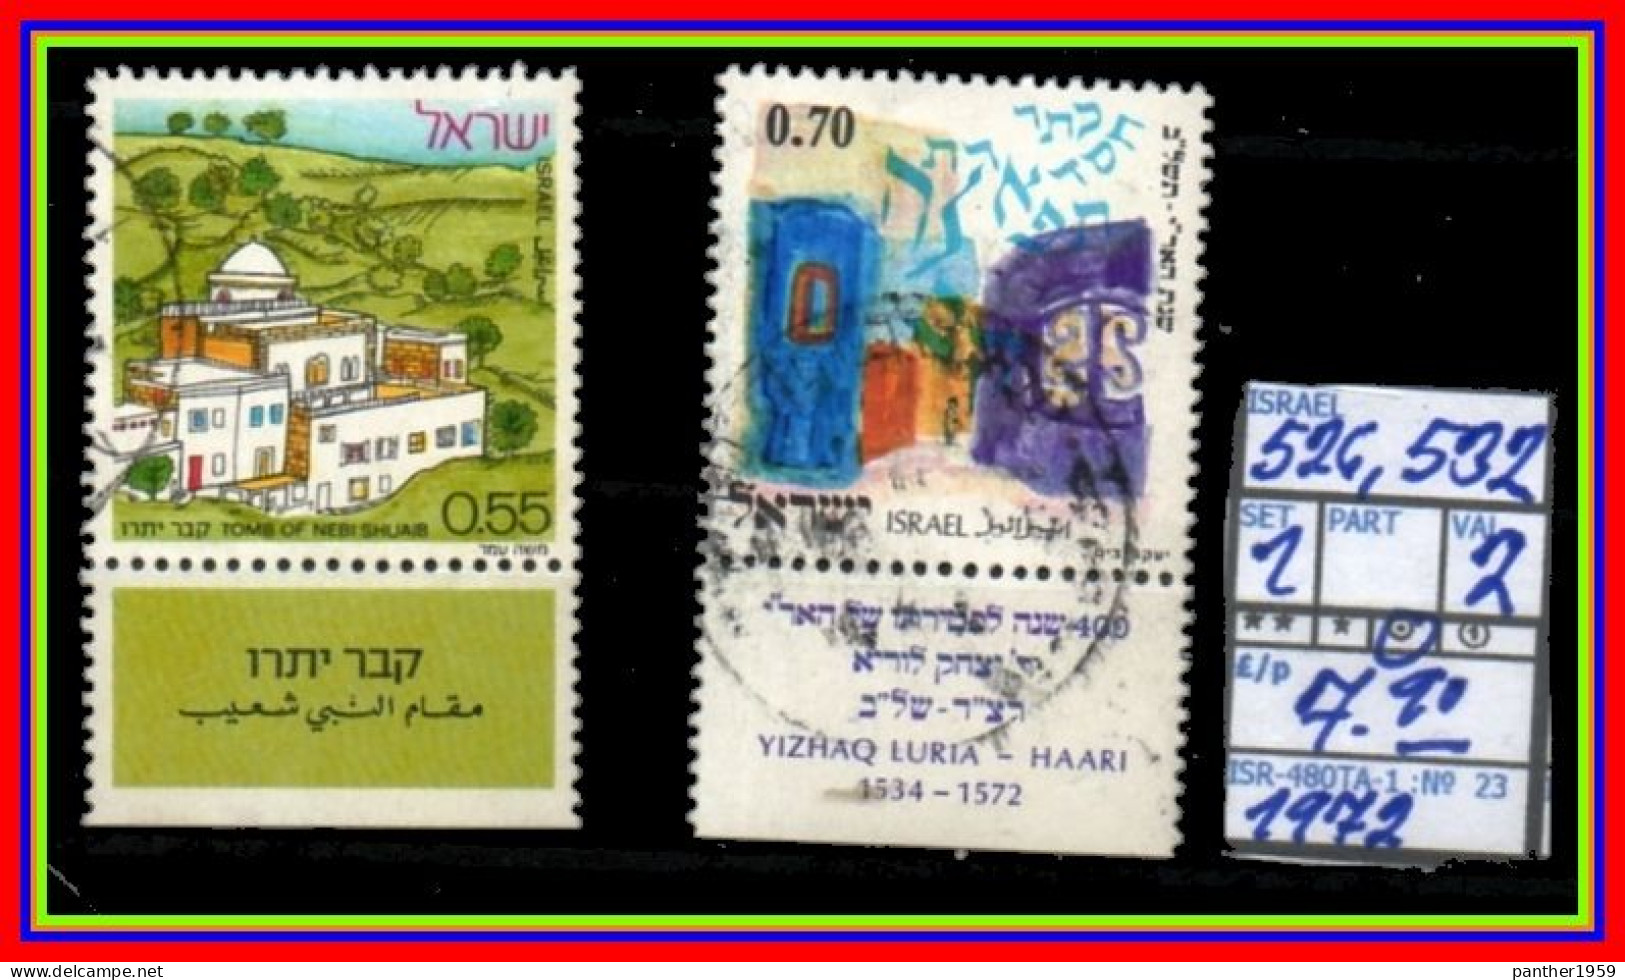 ASIA# ISRAEL# #COMMEMORATIVE SERIES WITH TABS# USED# (ISR-280TA-1) (23) - Used Stamps (with Tabs)